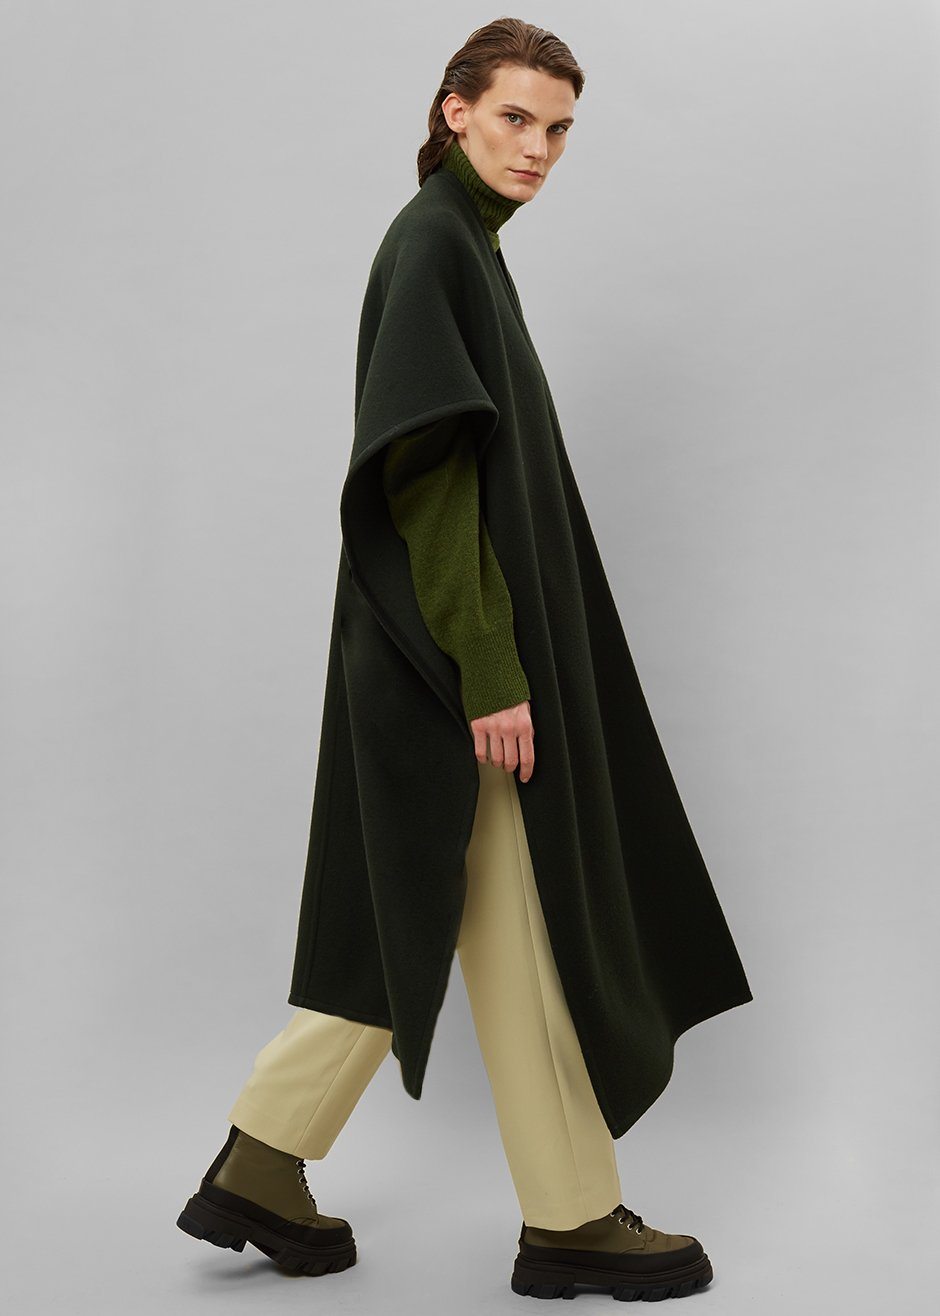 Verina Cape - Forest Green - 3